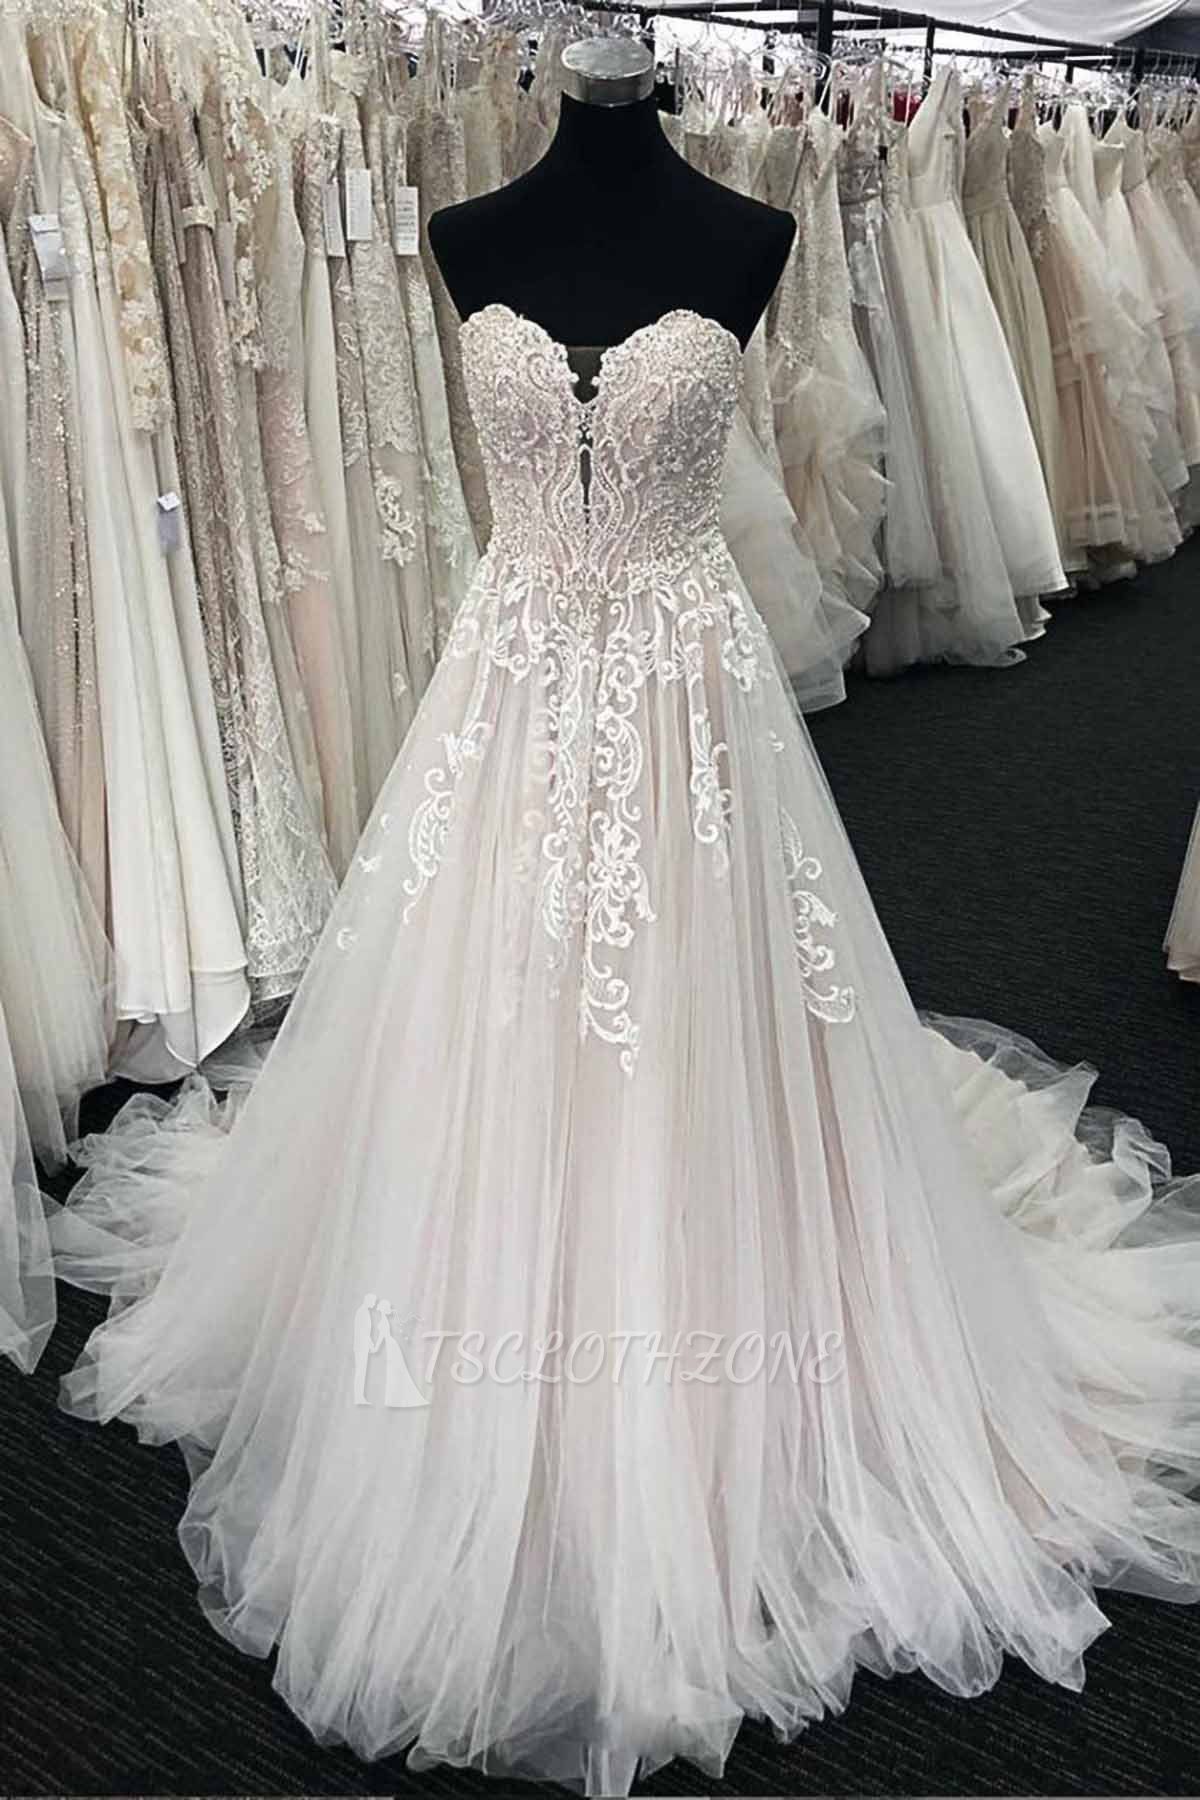 TsClothzone Chic Unique White Lace Long White Wedding Dress Sweetheart Appliques Bridal Gowns On Sale